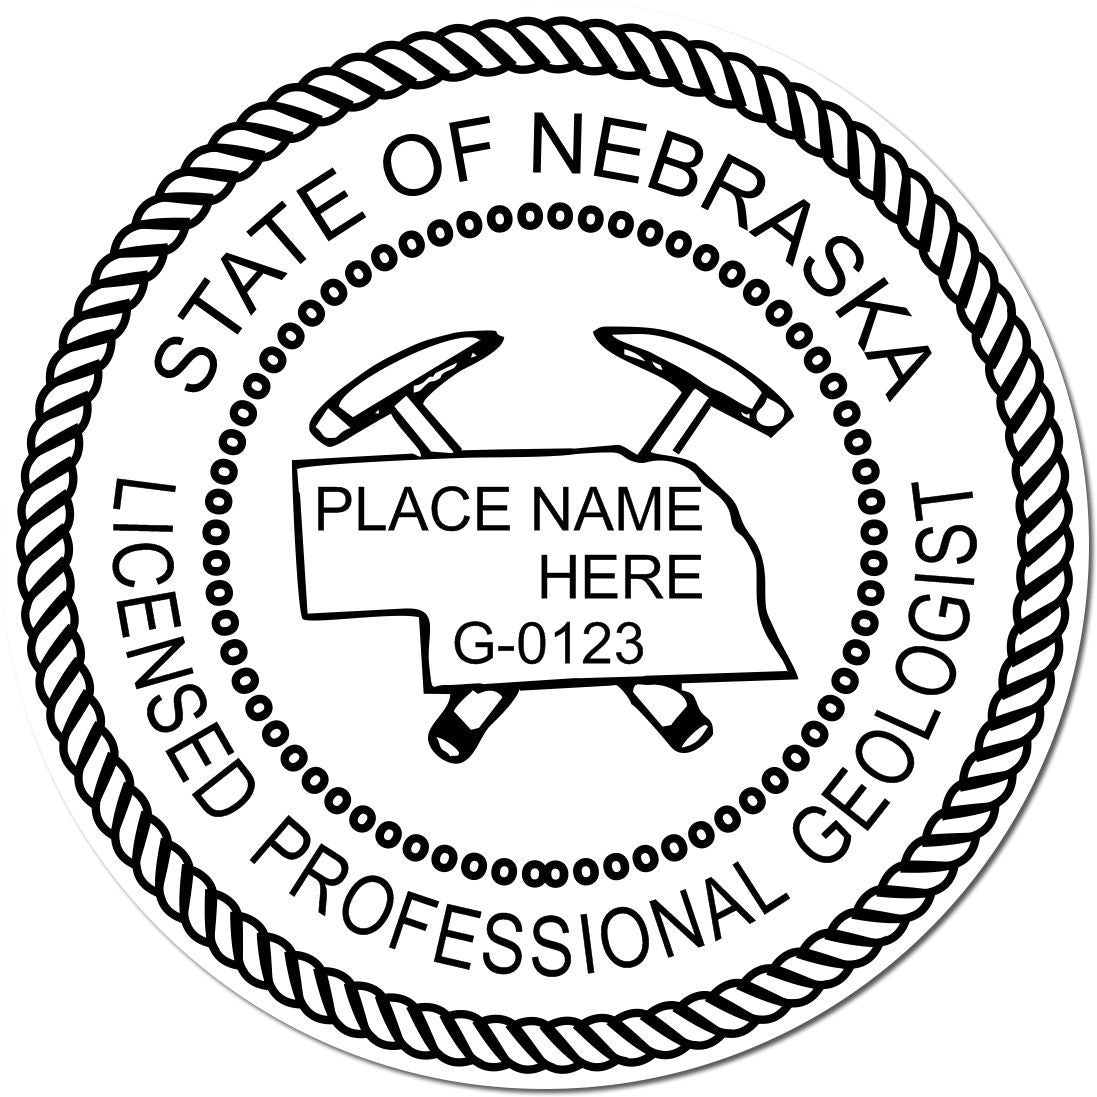 This paper is stamped with a sample imprint of the Nebraska Professional Geologist Seal Stamp, signifying its quality and reliability.